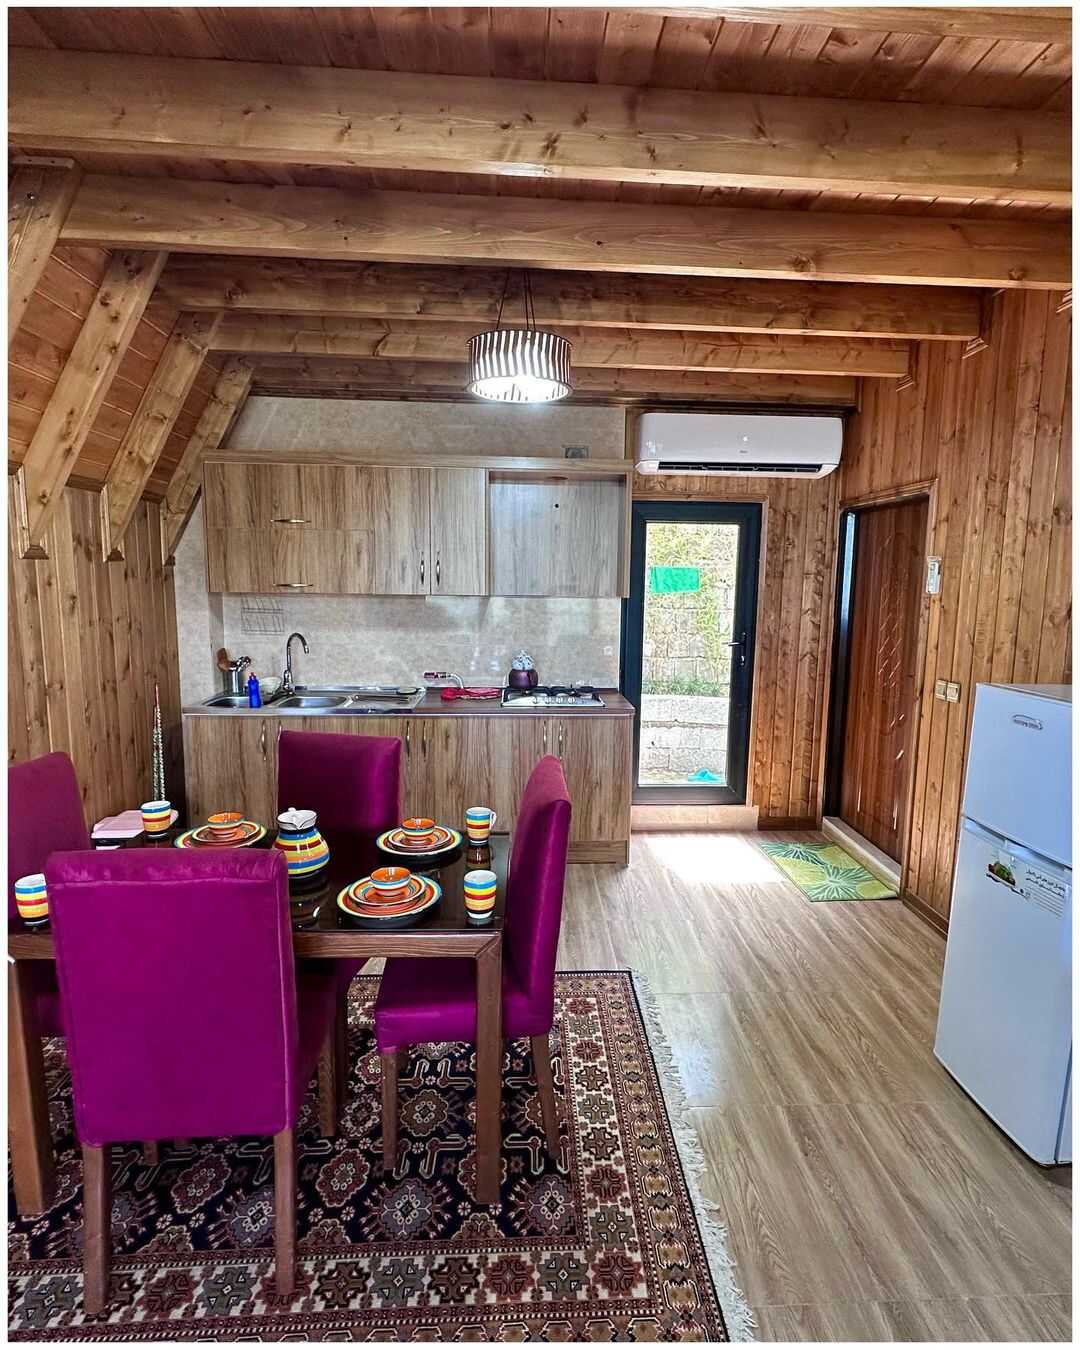 the kitchen in the Wooden villa